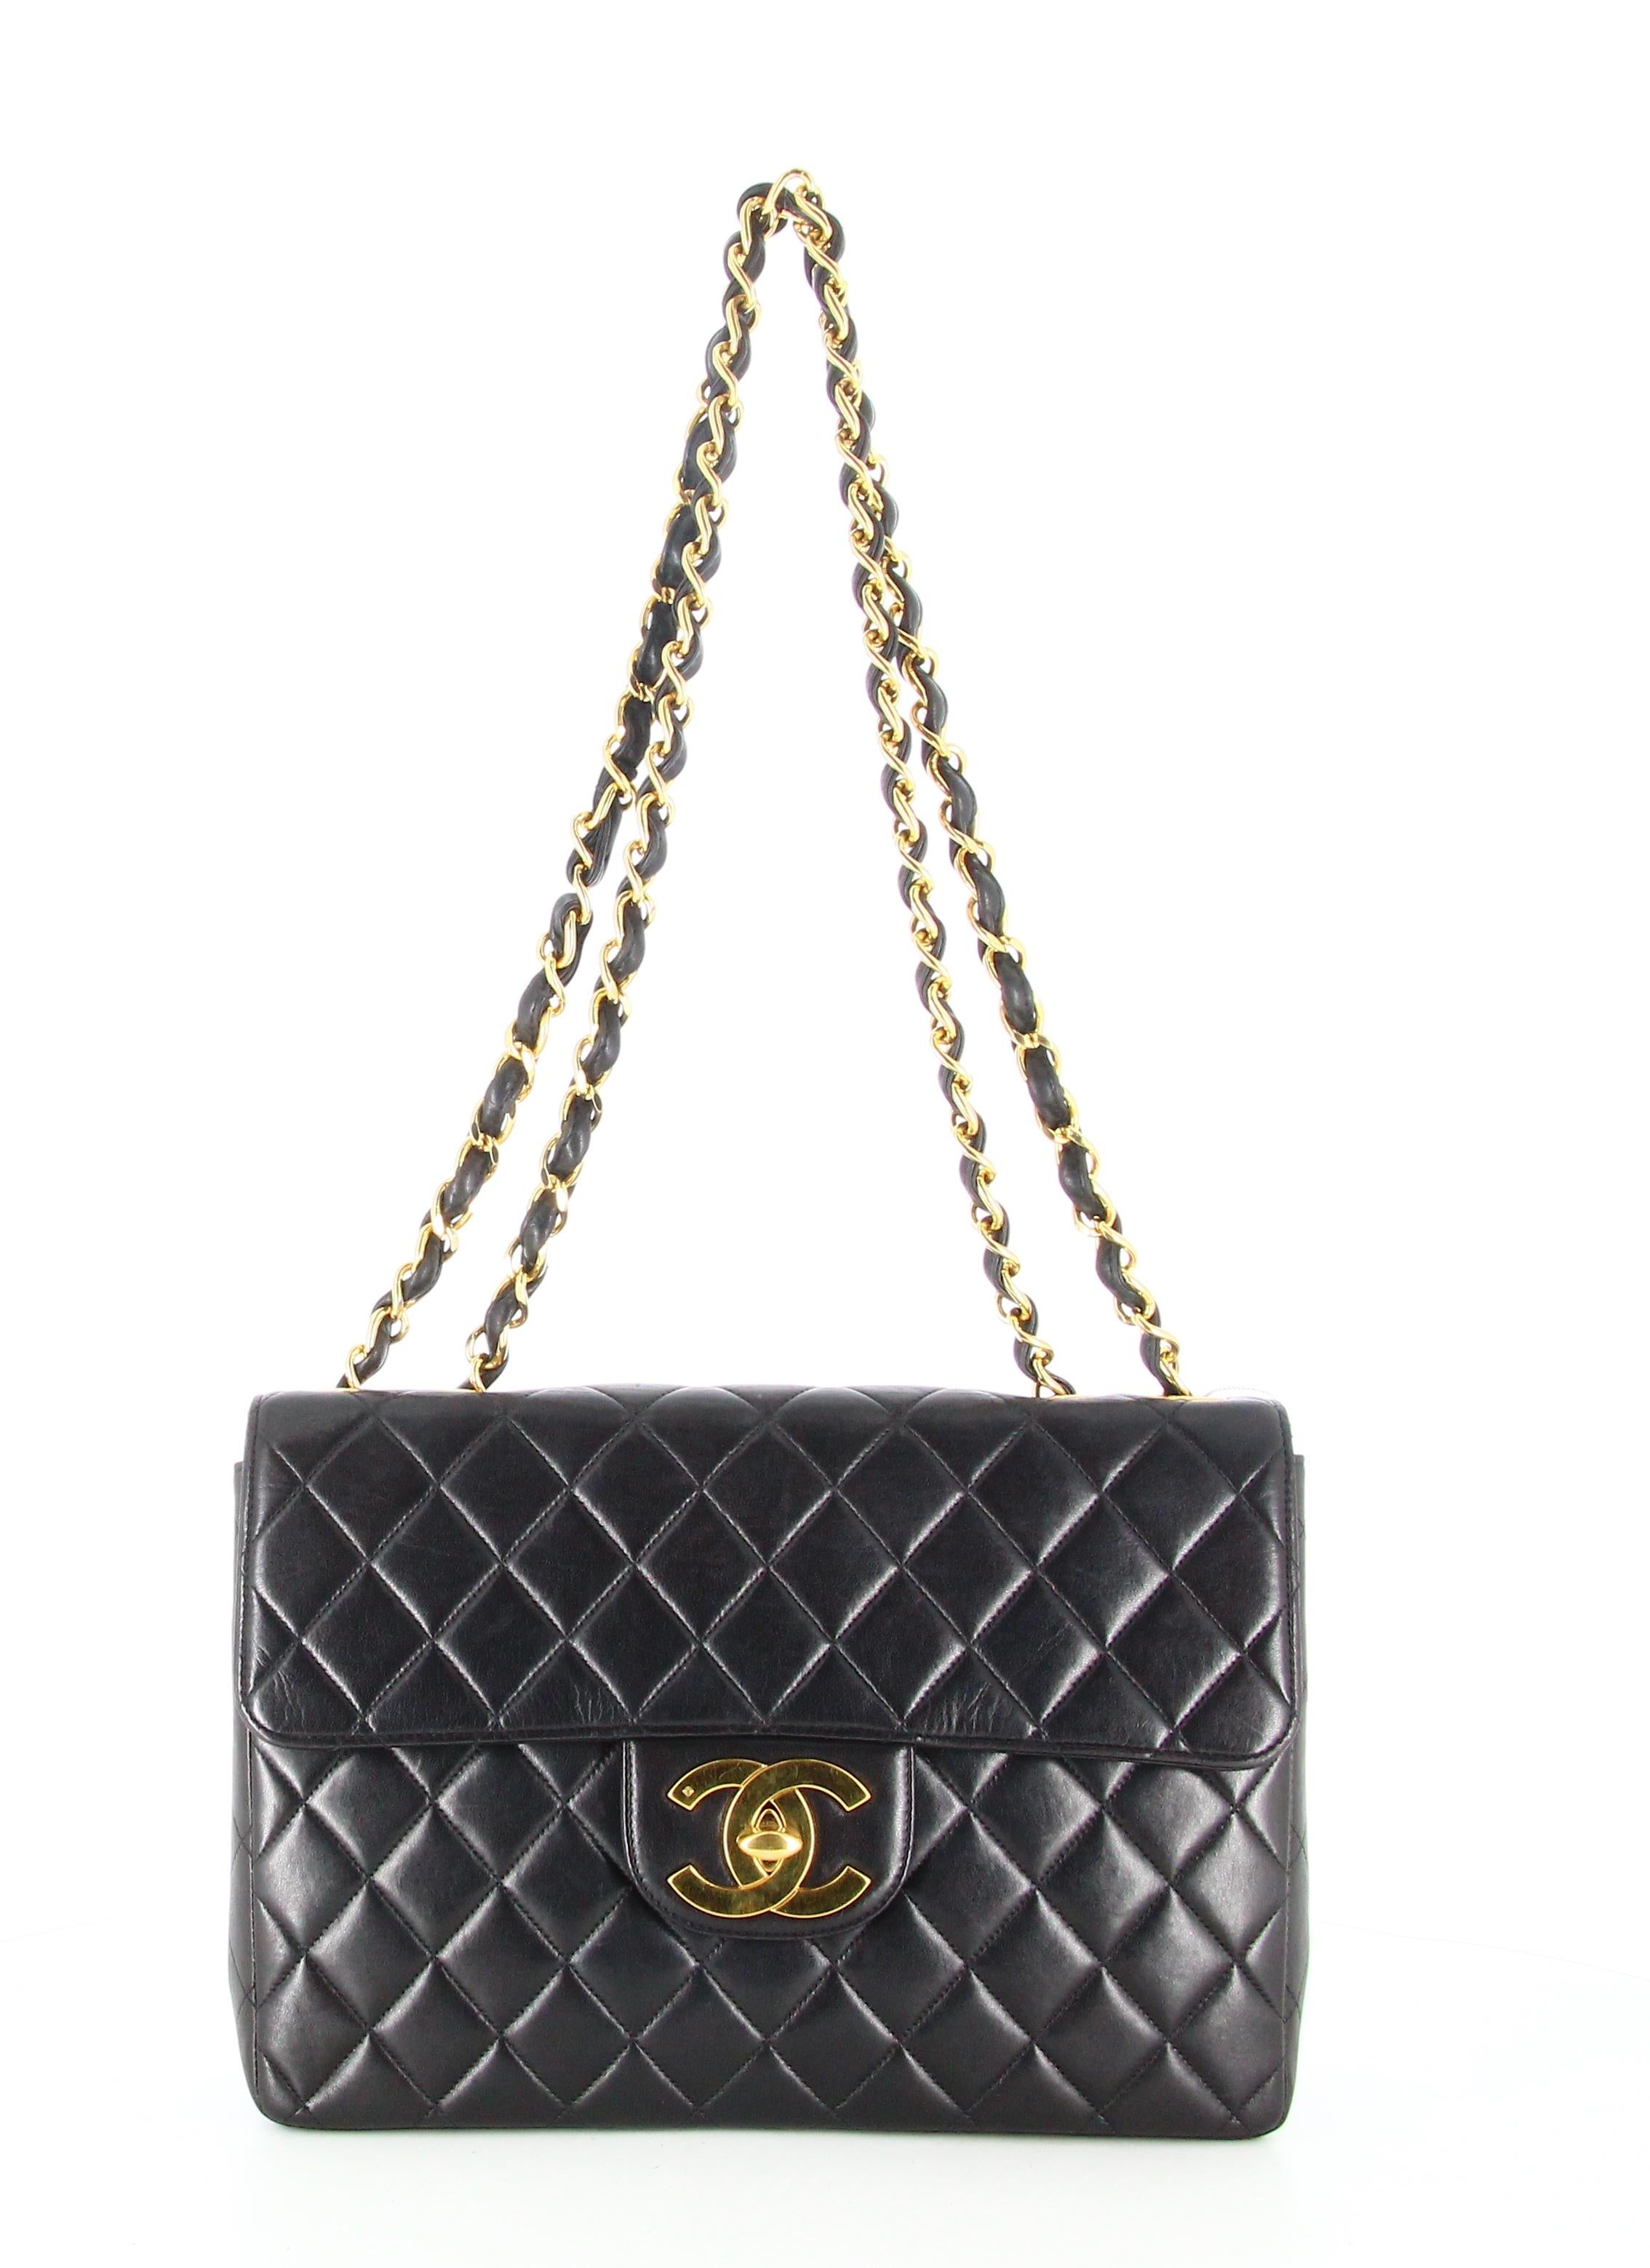 1994 Chanel Timeless Jumbo Quilted Handbag Black Golden 

- Good condition. Shows signs of wear and tear over time.
- Chanel timeless handbag
- Black quilted 
- Lambskin leather 
- Clasp: Double C golden 
- Double golden chain and black leather 
-